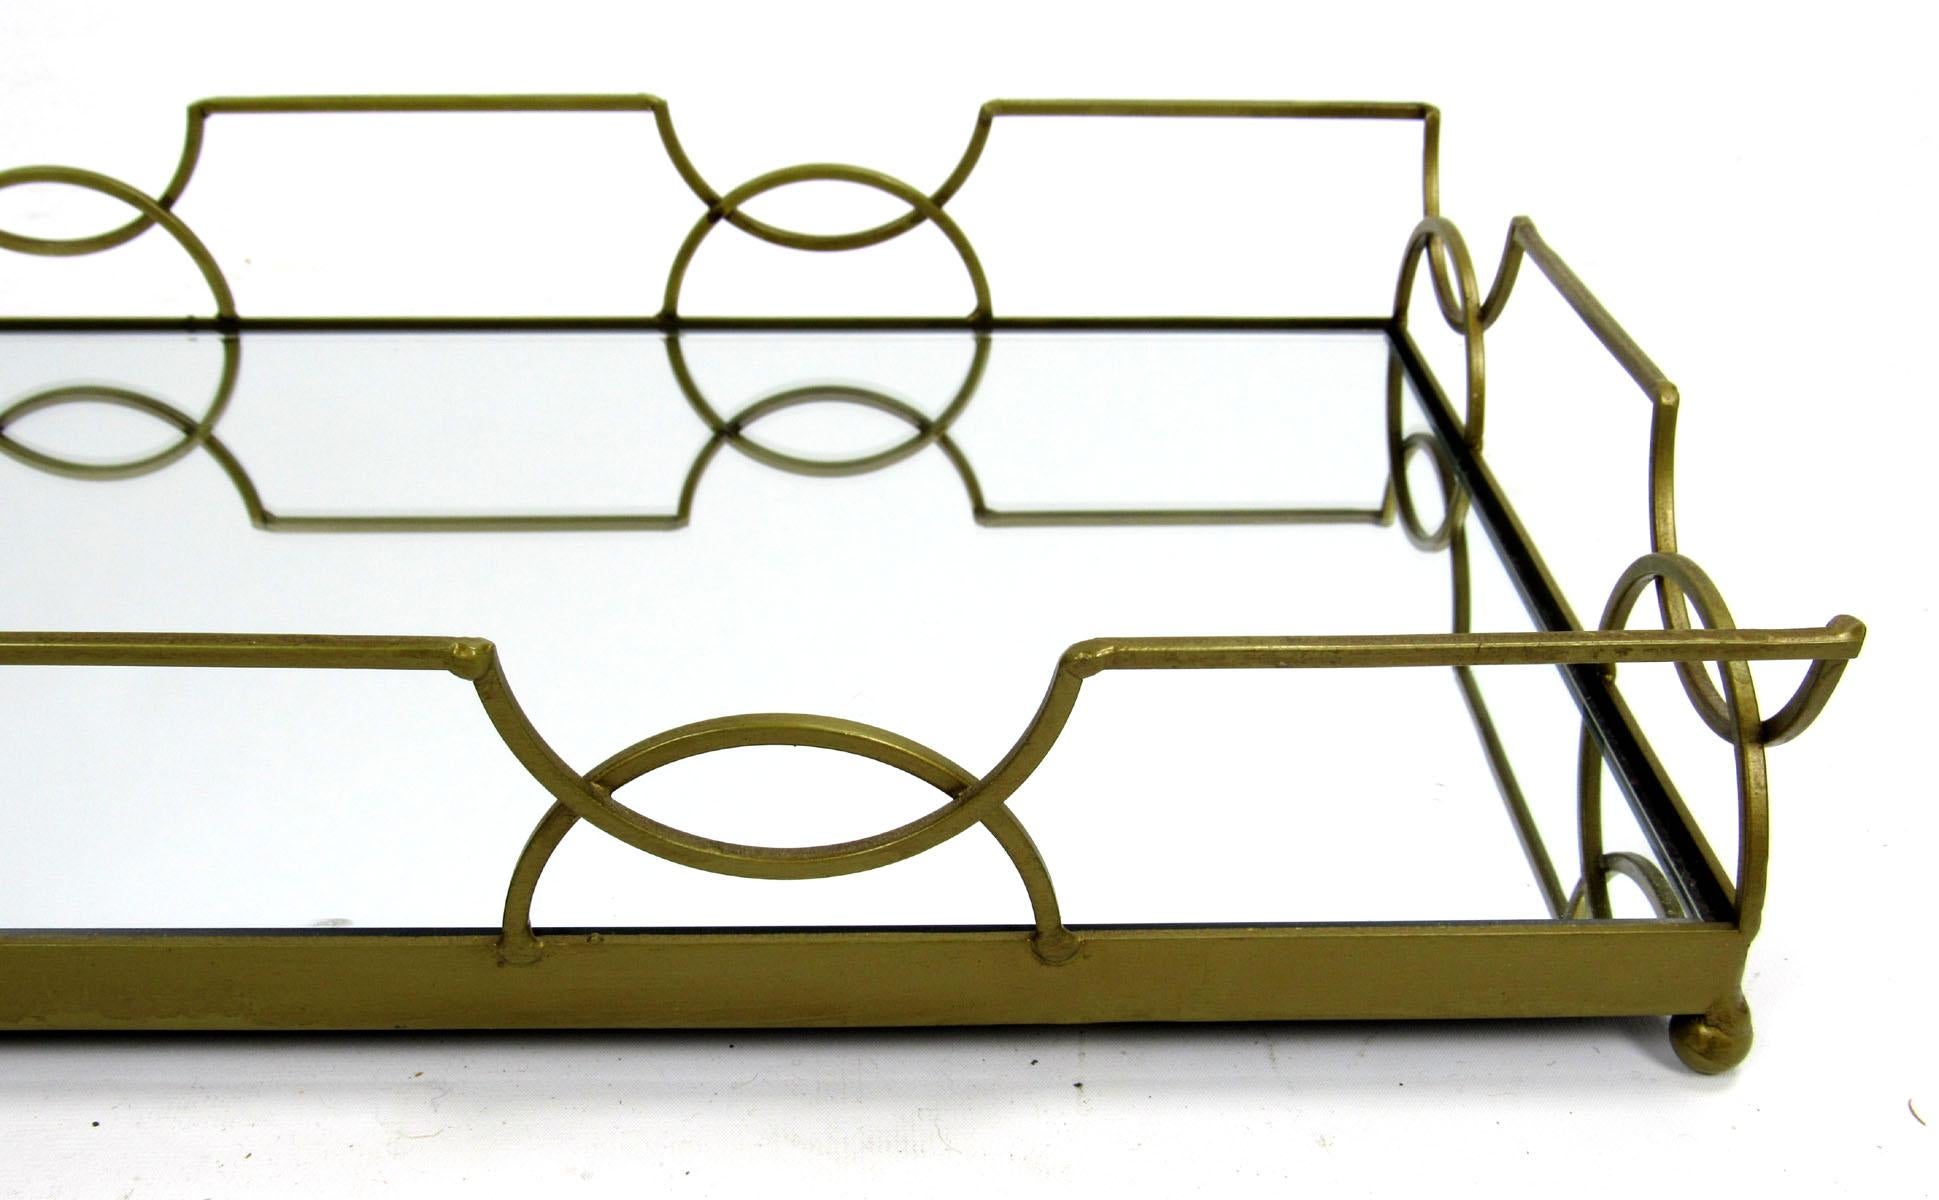 Contemporary 21st Century Rectangular Decorative Serving Tray For Sale